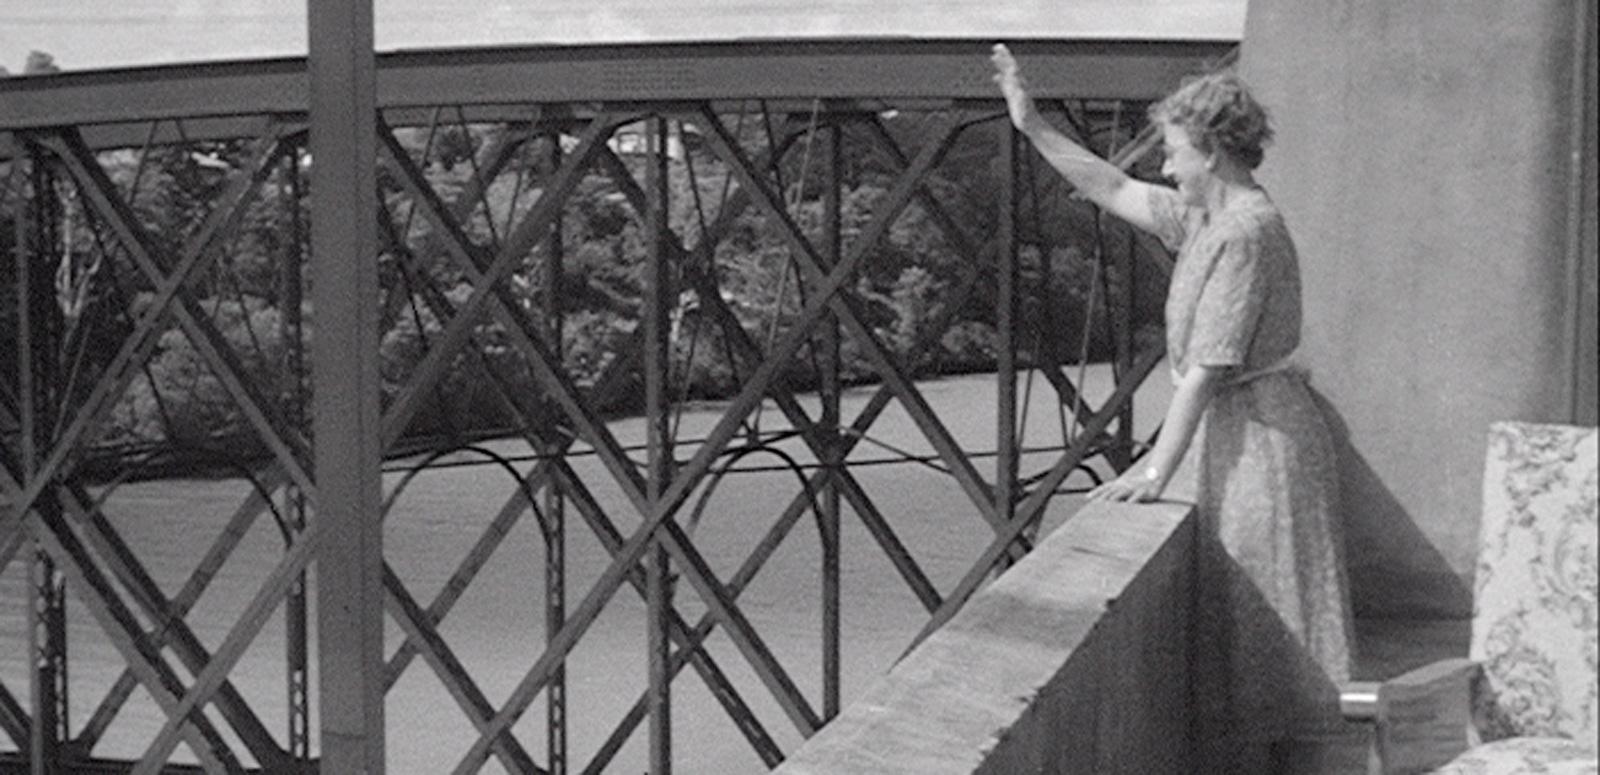 A woman is waving at someone we can't see. She is standing on a balcony with girders of a bridge nearby.